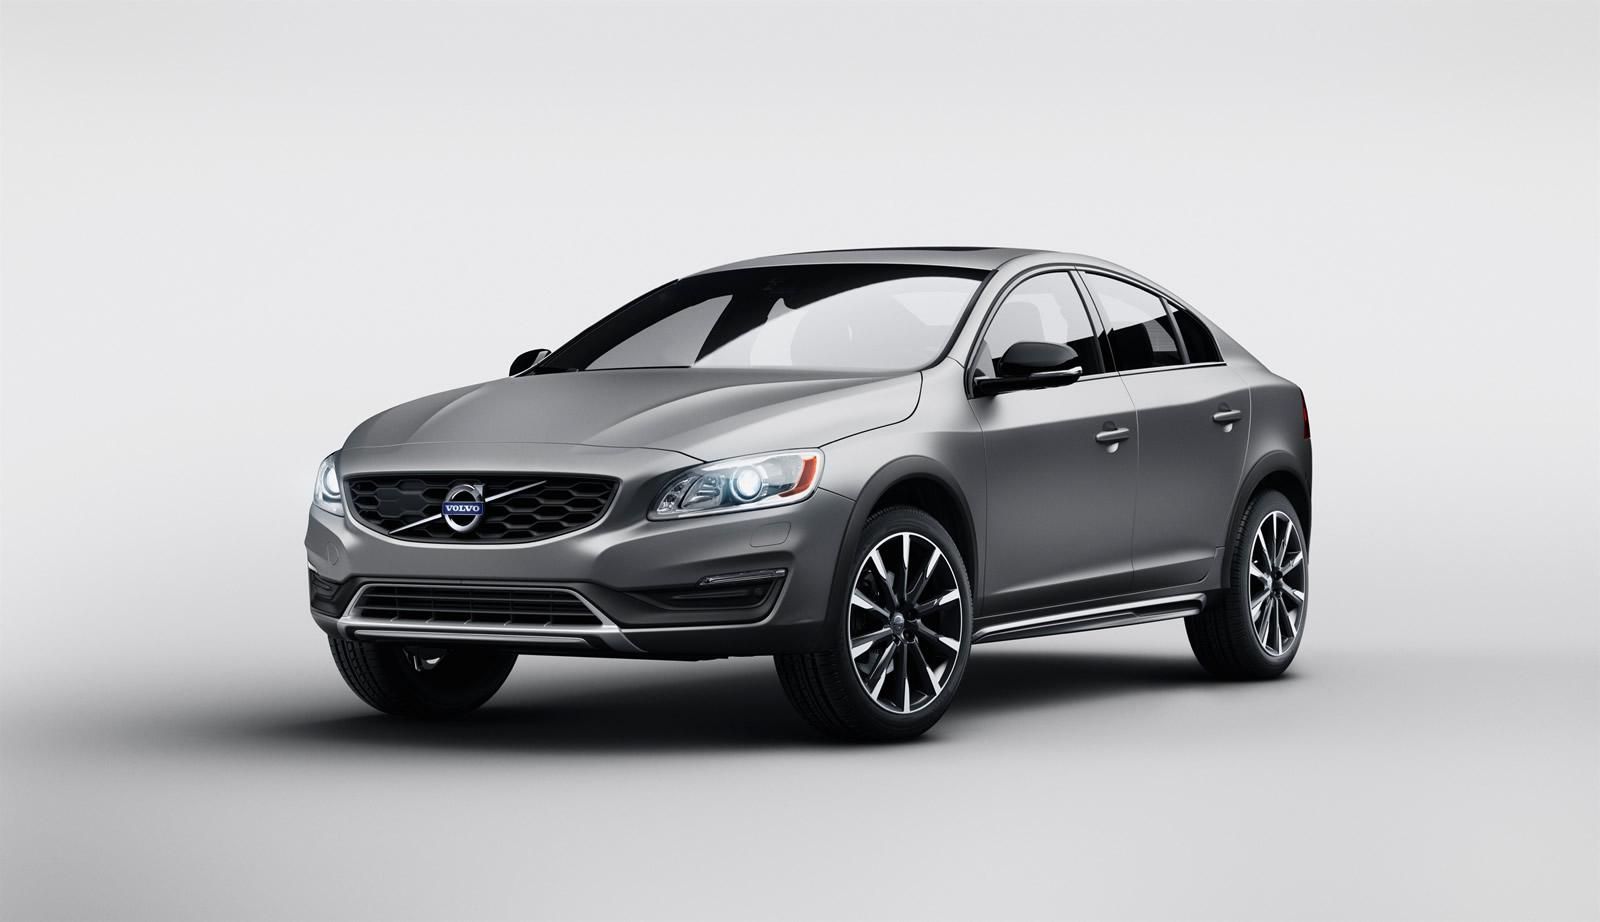 Volvo S60 Cross Country Launched at Rs 38.9 lakh